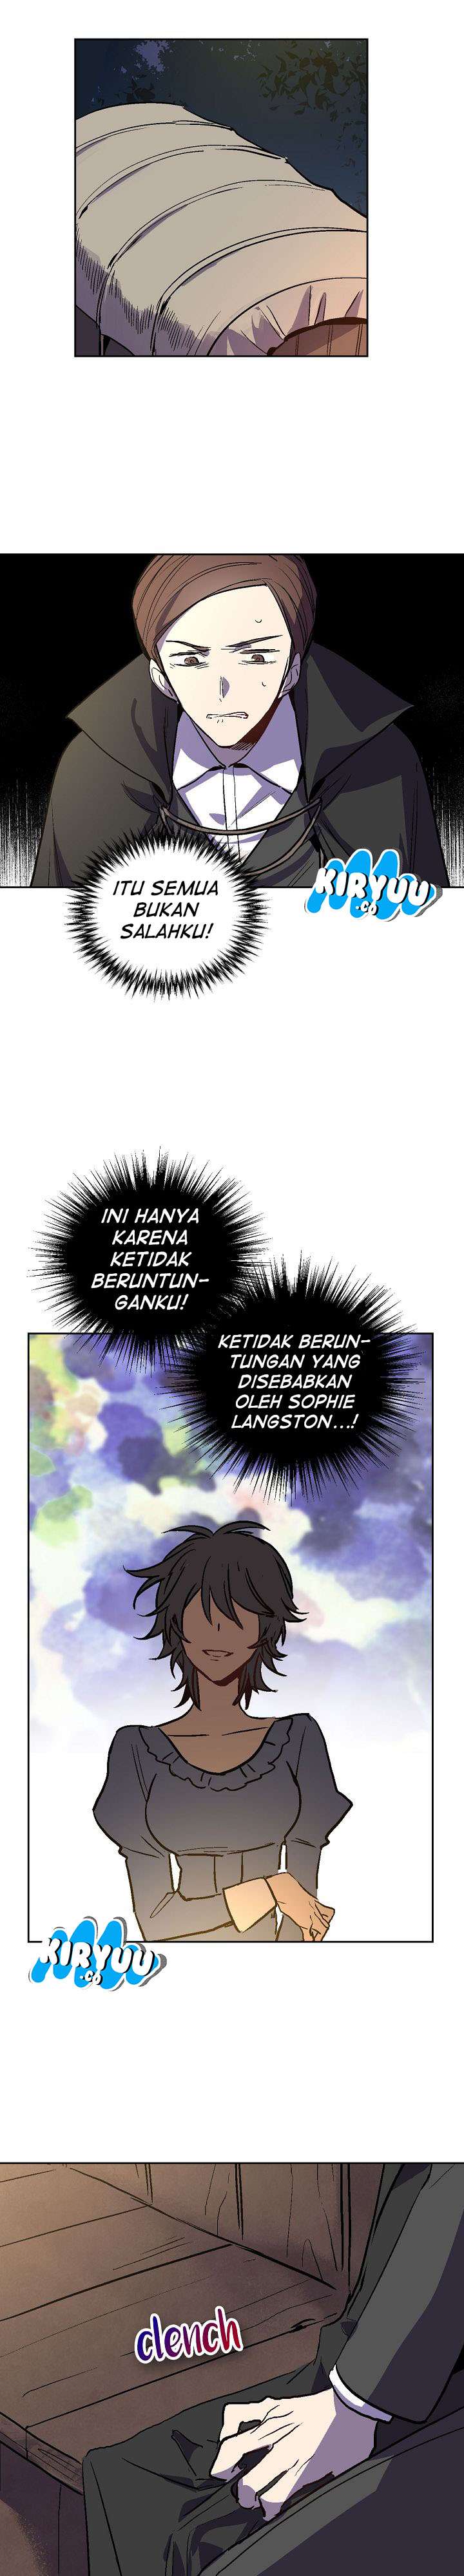 The Reason Why Raeliana Ended Up at the Duke’s Mansion Chapter 18 Bahasa Indonesia